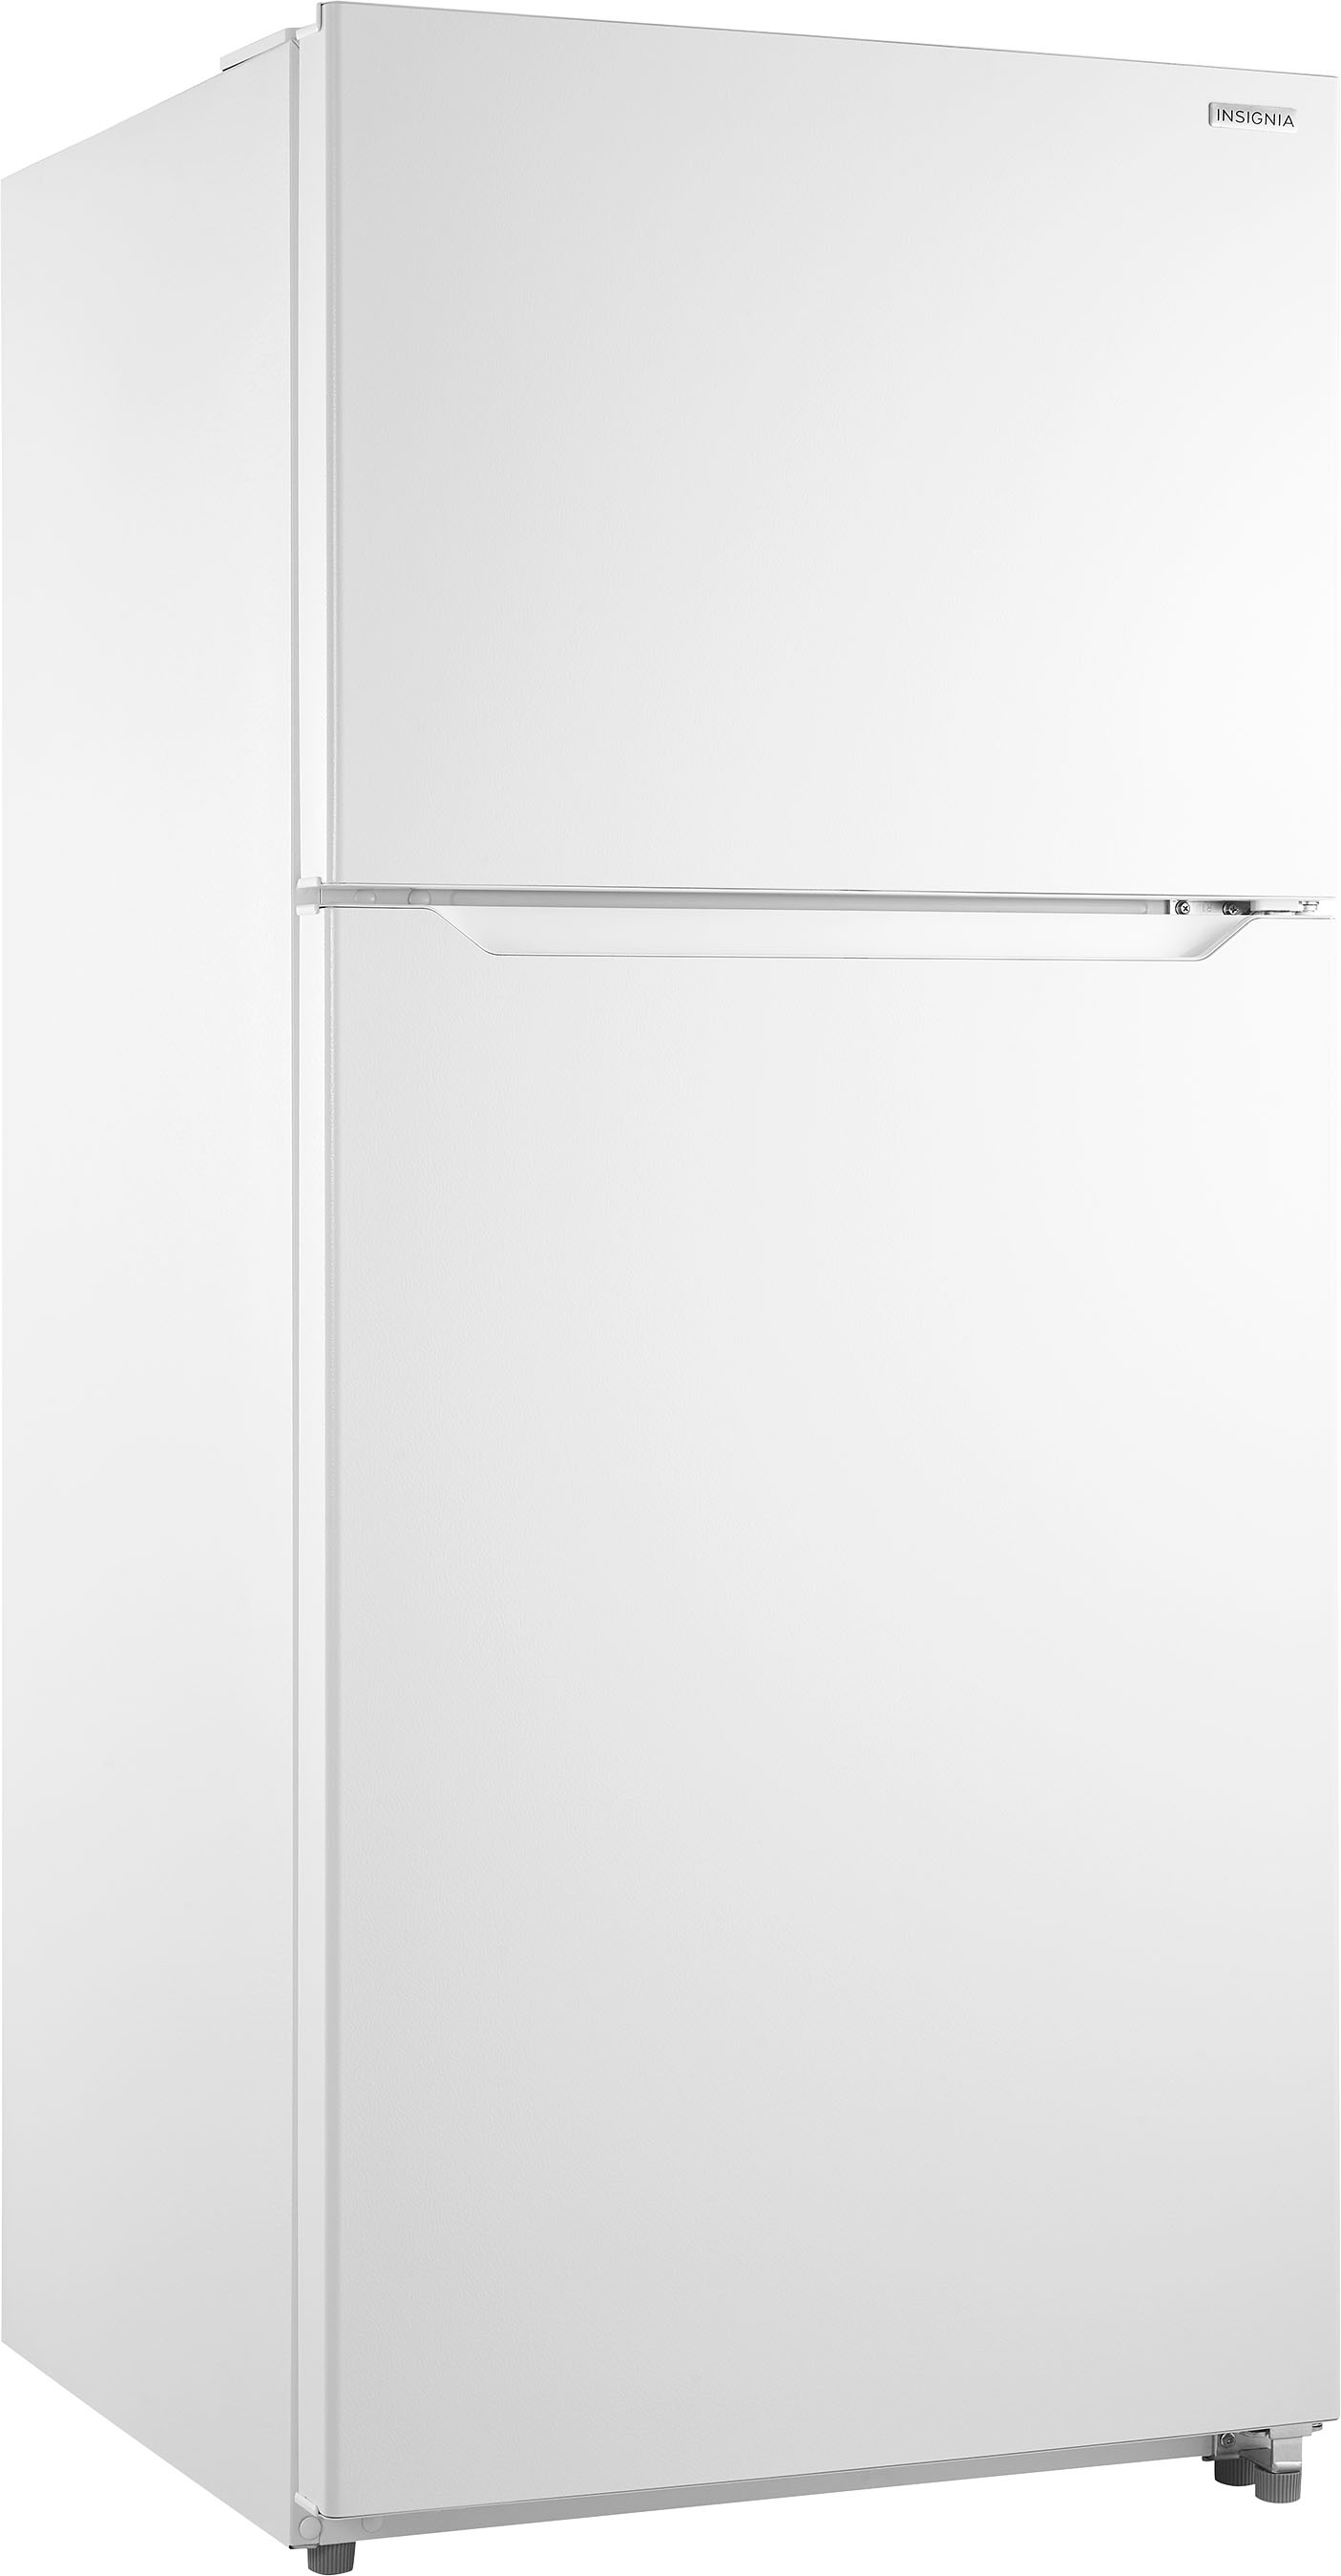 Angle View: Insignia™ - 18 Cu. Ft. Top-Freezer Refrigerator withENERGY STAR Certification - White